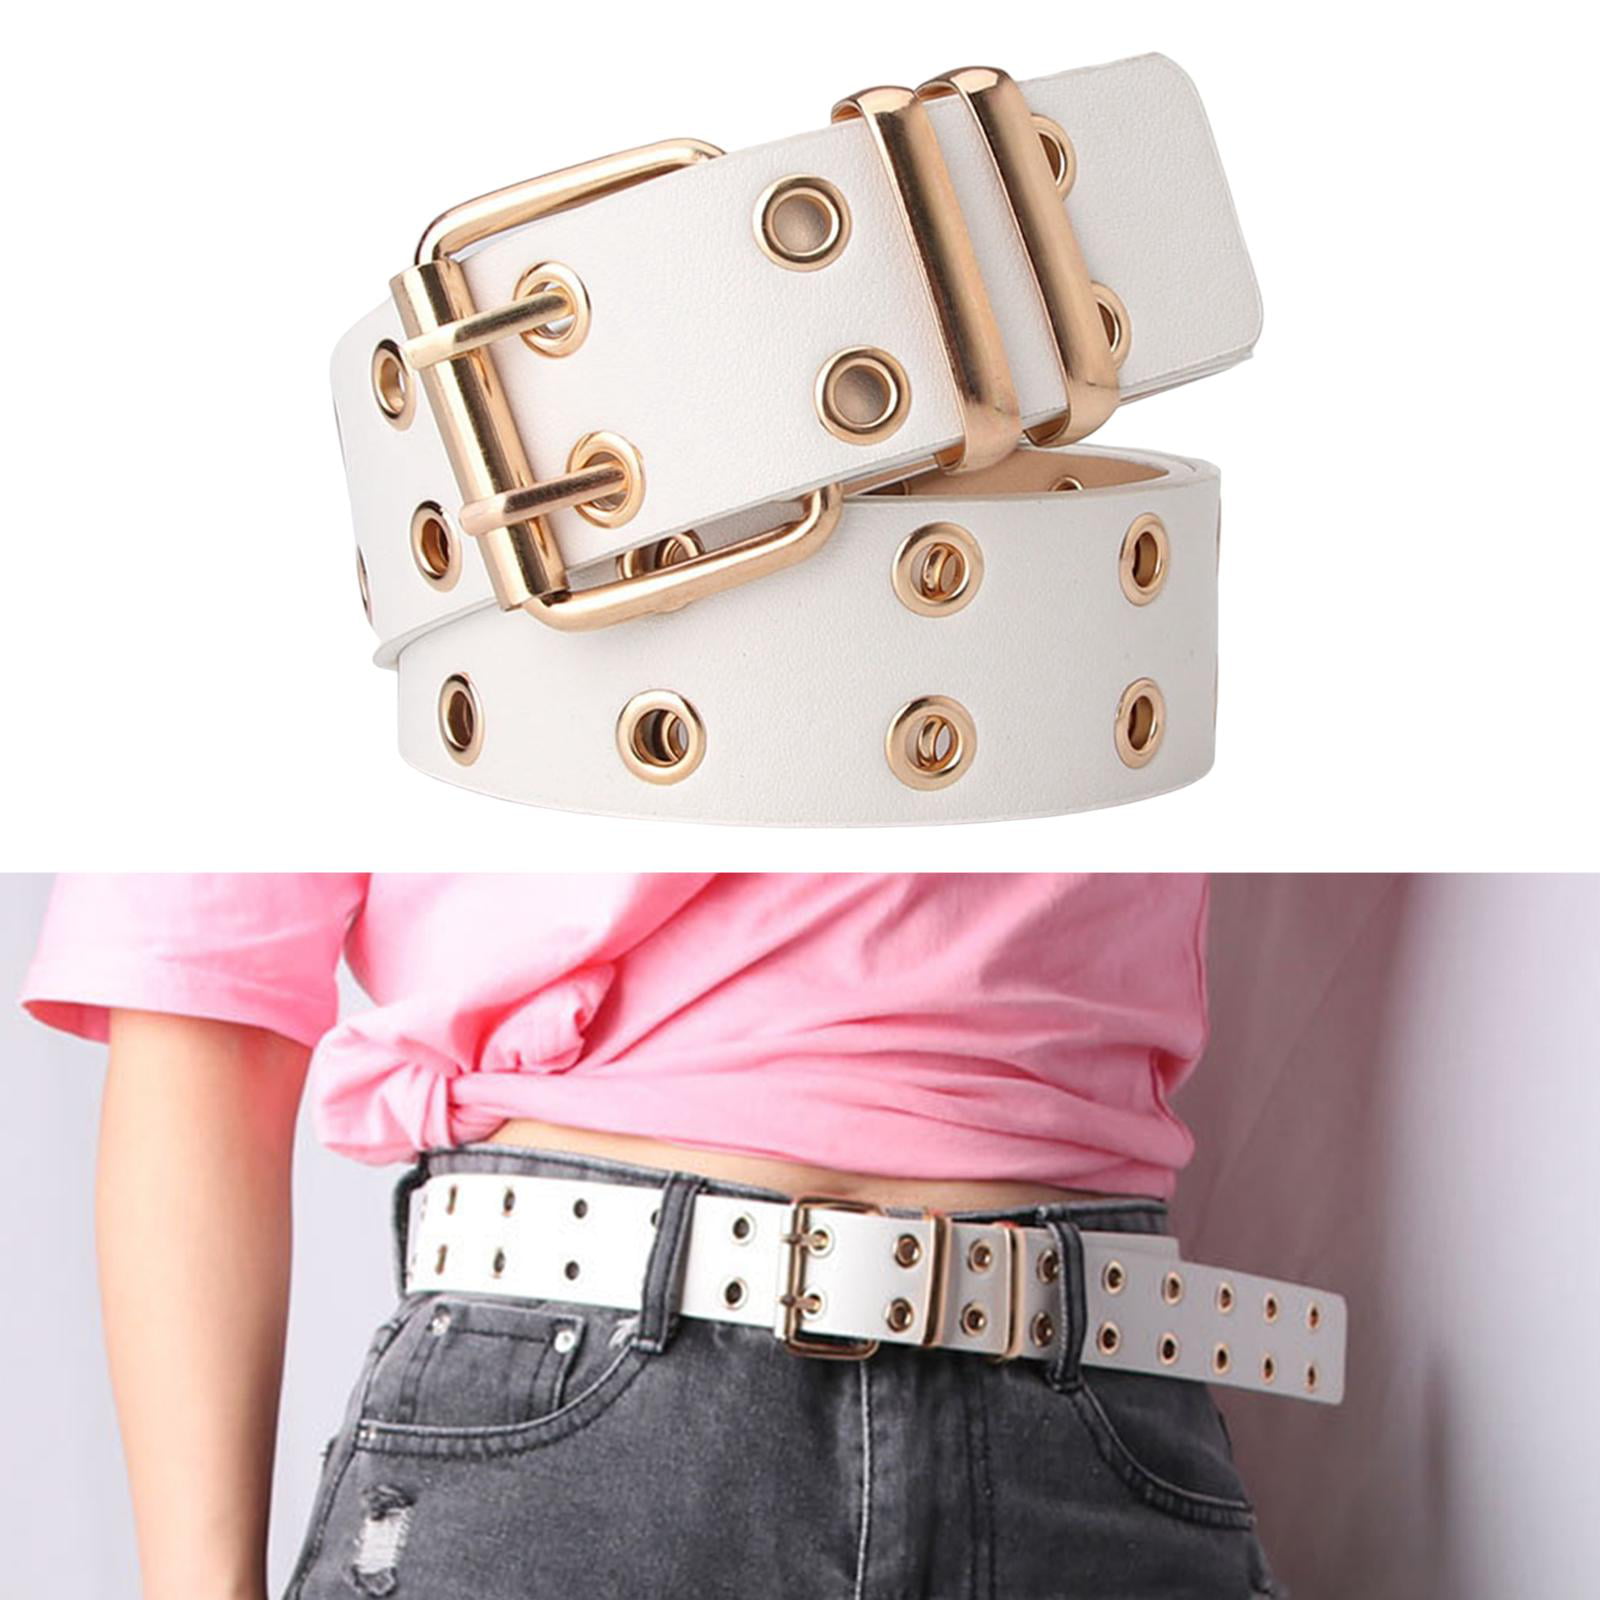 Punk Leather PU Accessories, Hollow with Eyelet for Gothic Jeans. Pants Adjustable White , Belt, Double Fashion Vintage Grommet